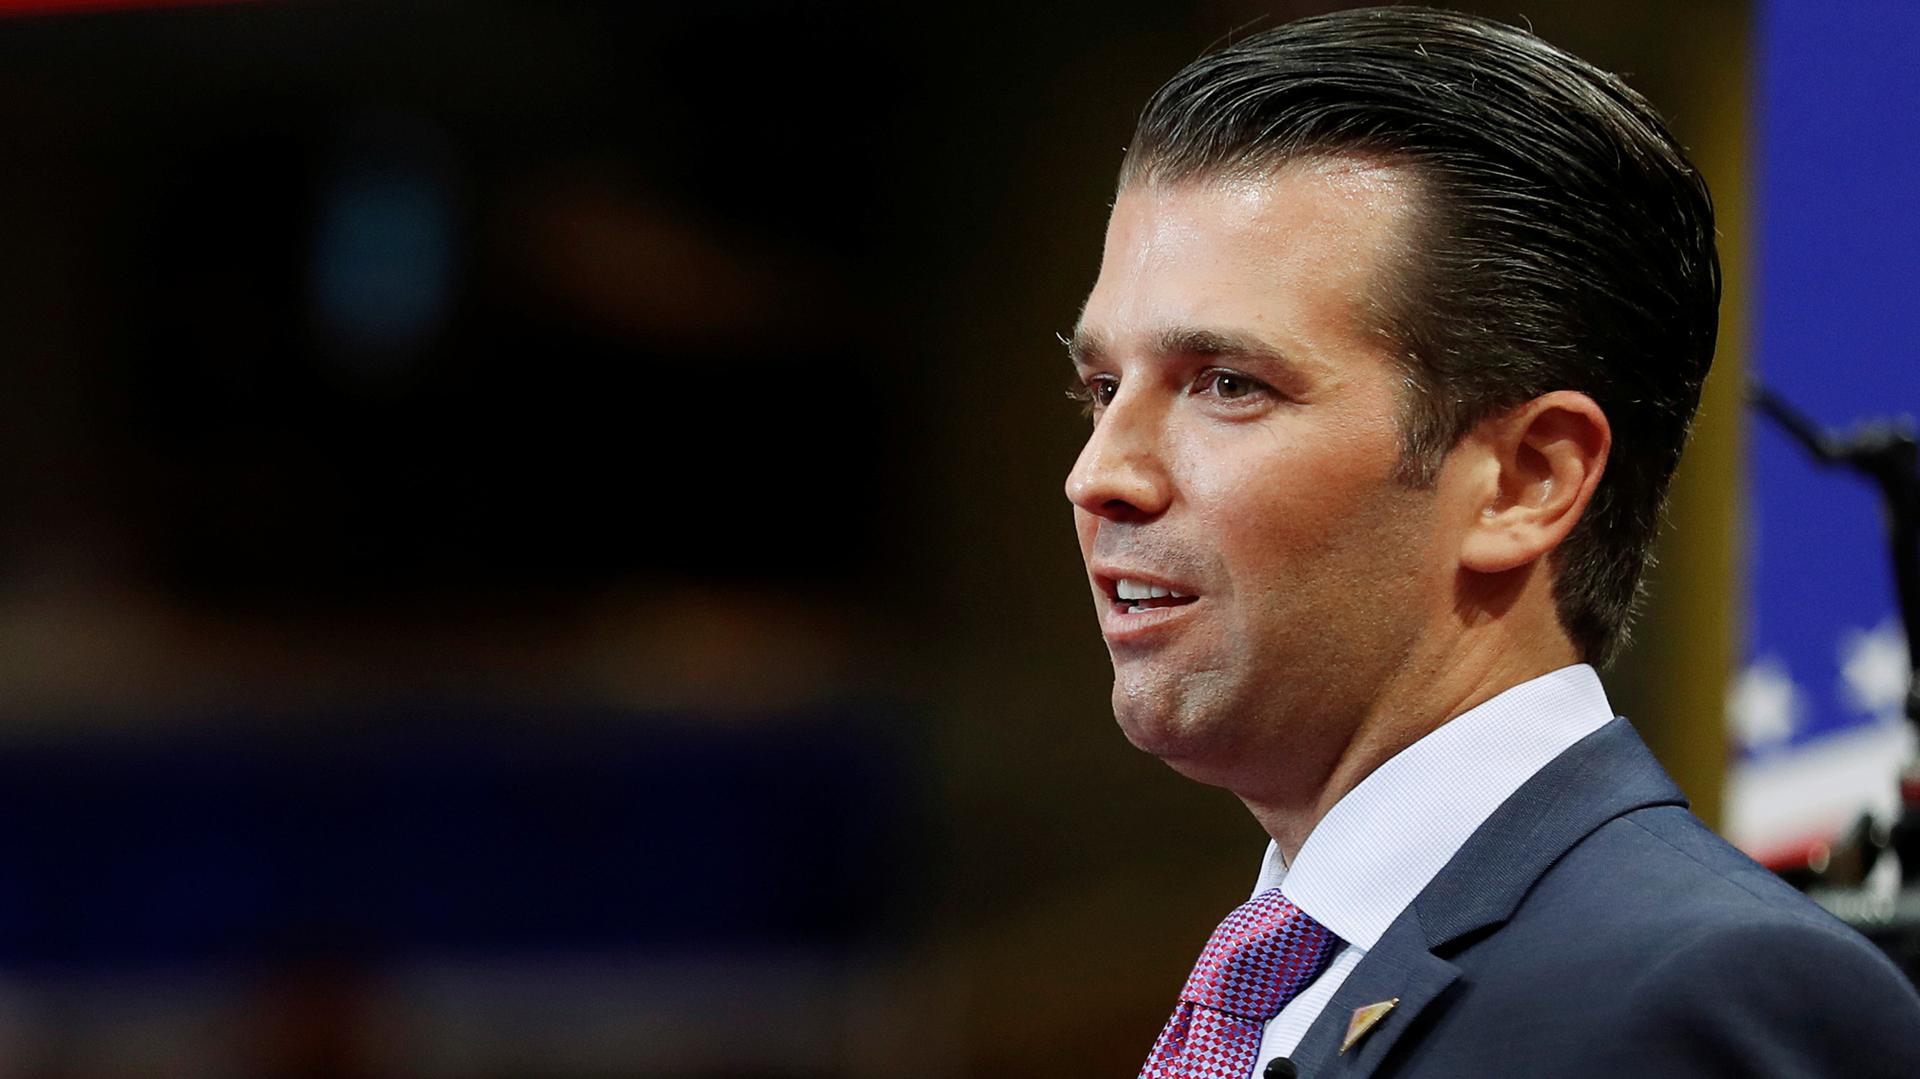 Donald Trump Jr. at the 2016 Republican National Convention. July 19, 2016.